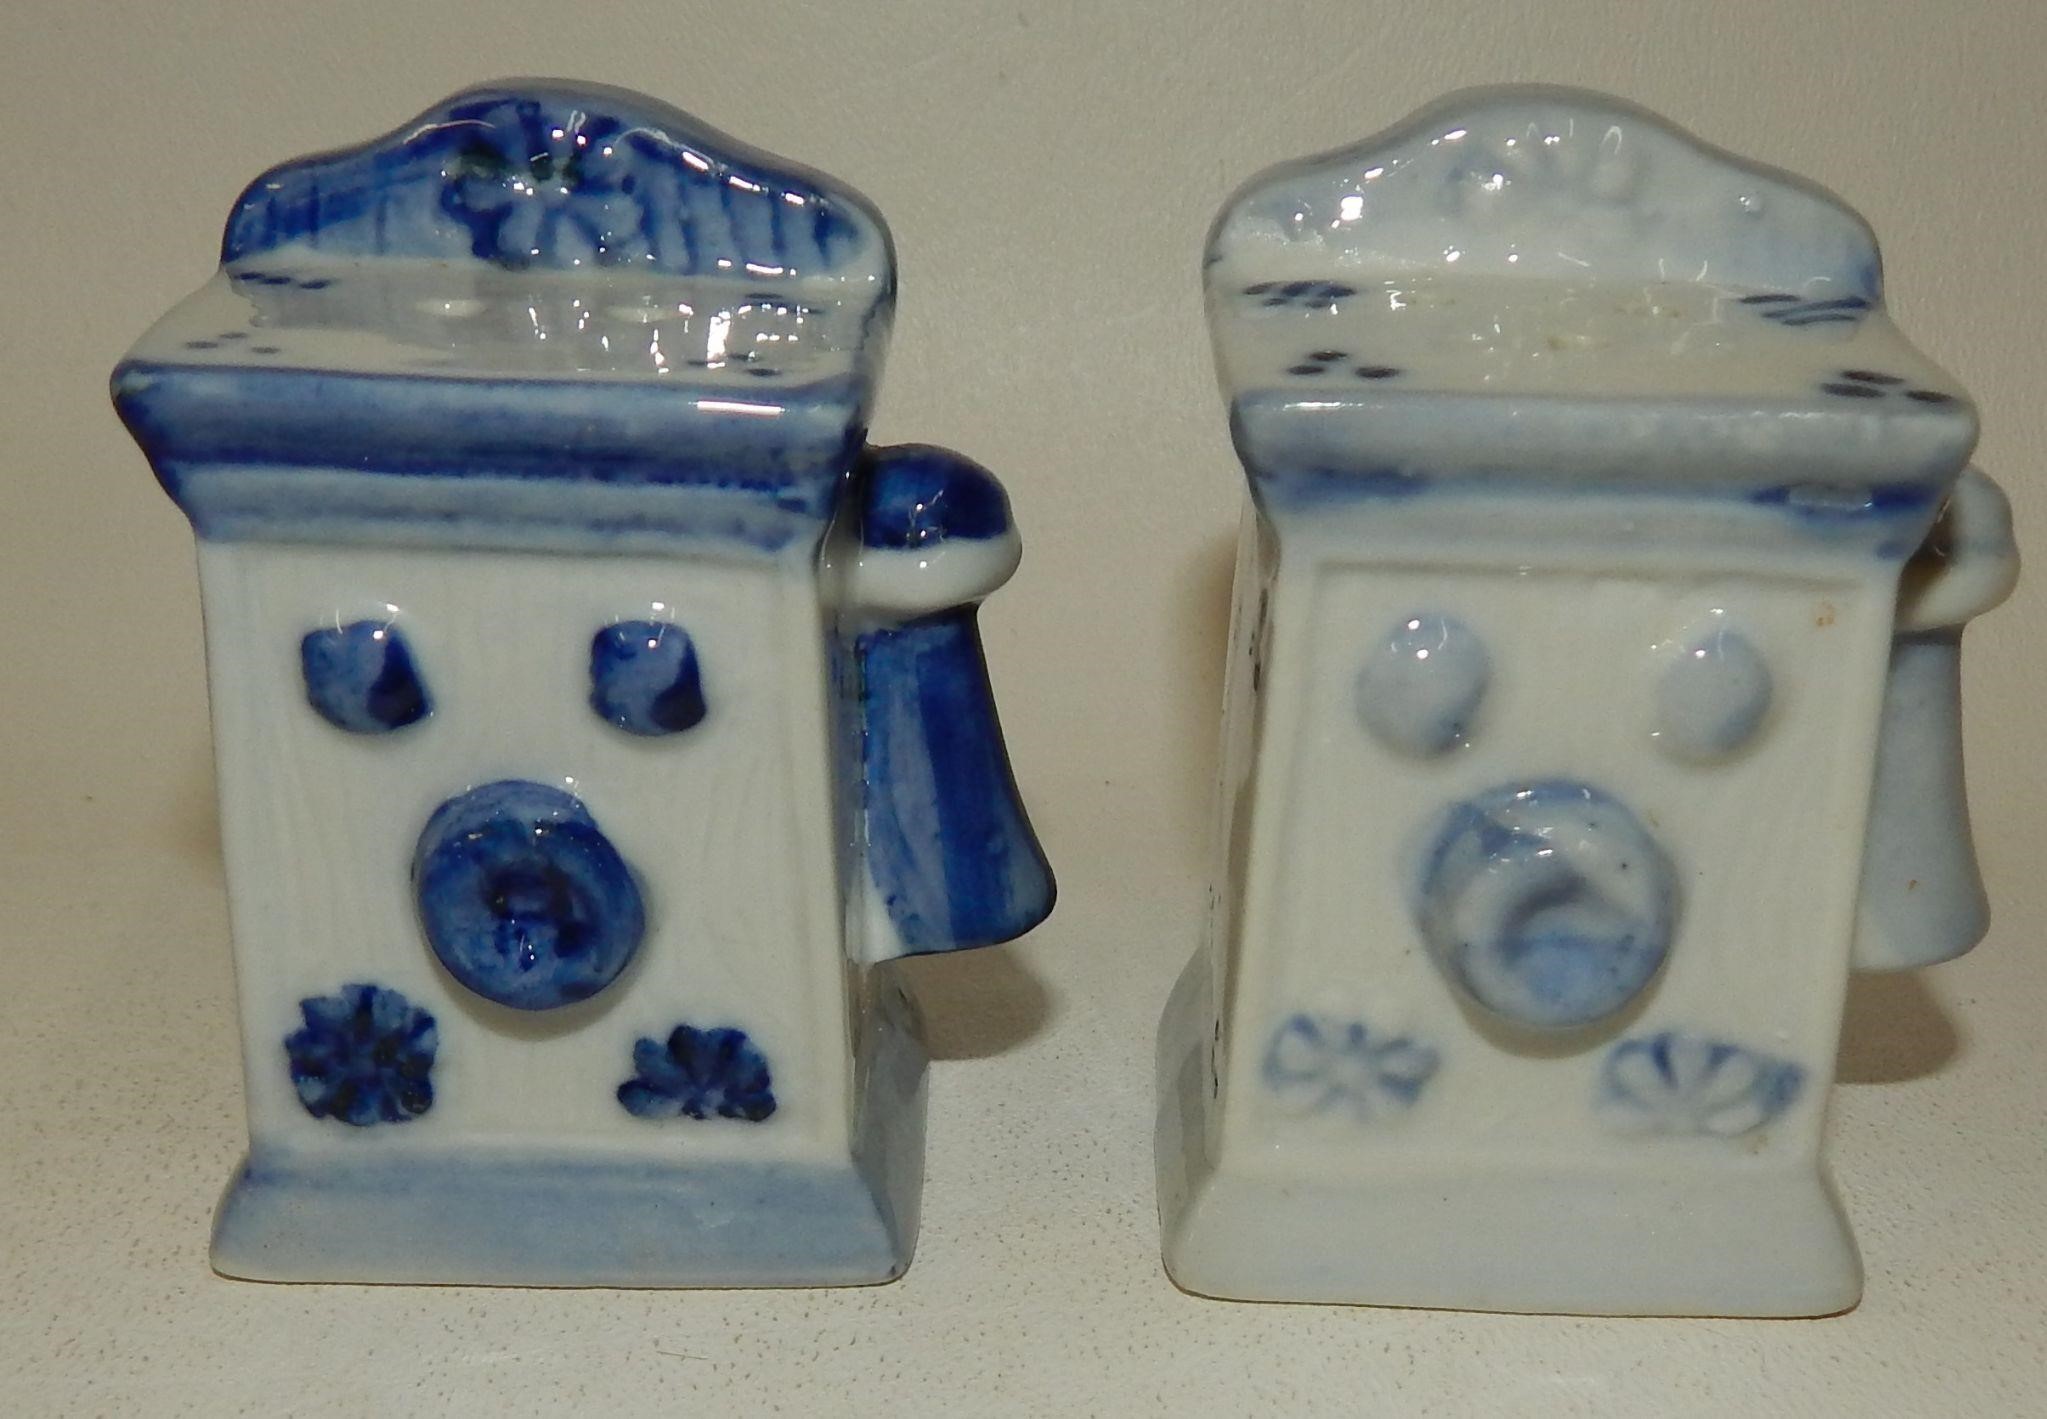 Blue & White Antique Wall Telephones